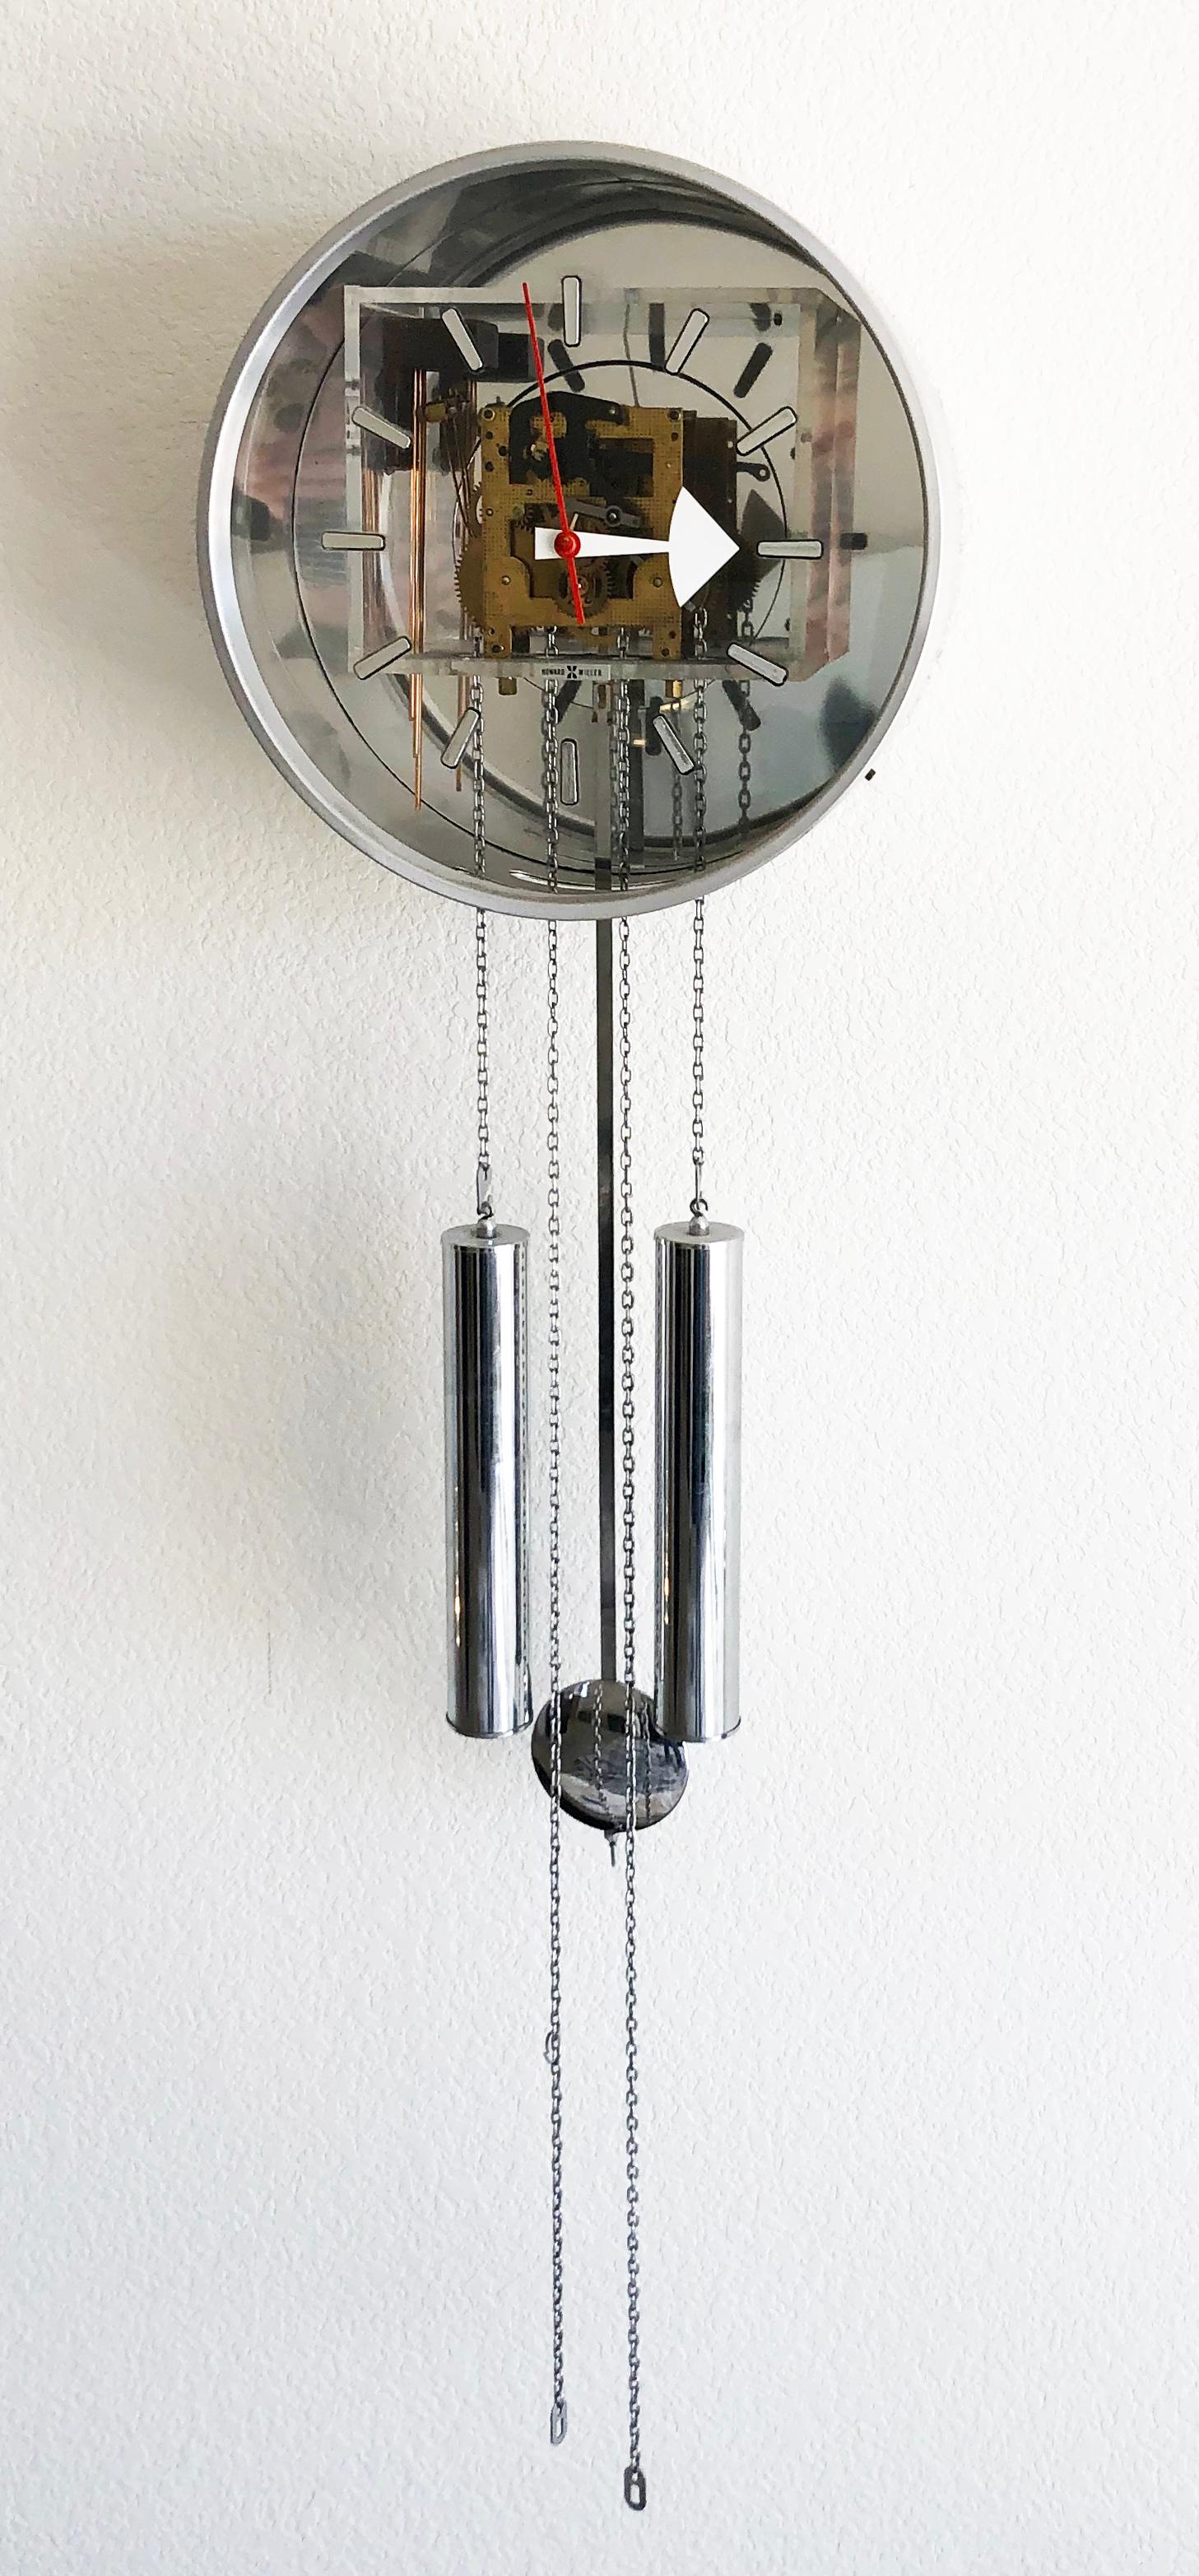 A truly stunning modern wall mounted clock by George Nelson for Howard Miller. This pendulum wall clock features a transparent acrylic face that allows you to see all the inner-working mechanisms. The striking white hour hand and bold red minute